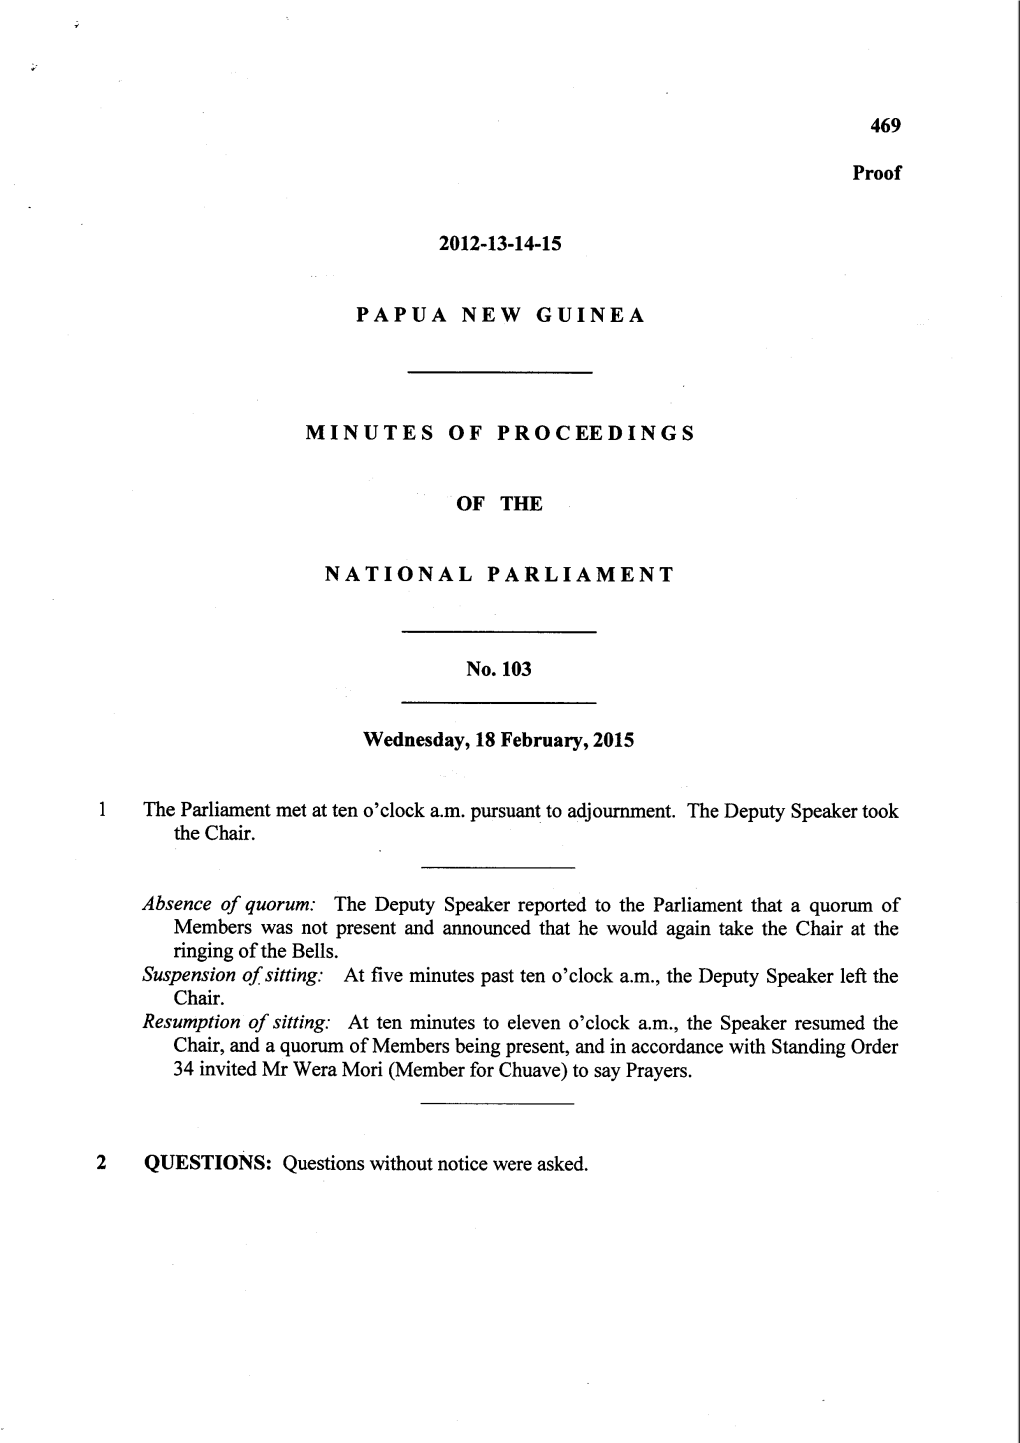 469 Proof 2012-13-14-15 PAPUA NEW GUINEA MINUTES of PROCEEDINGS of the NATIONAL PARLIAMENT